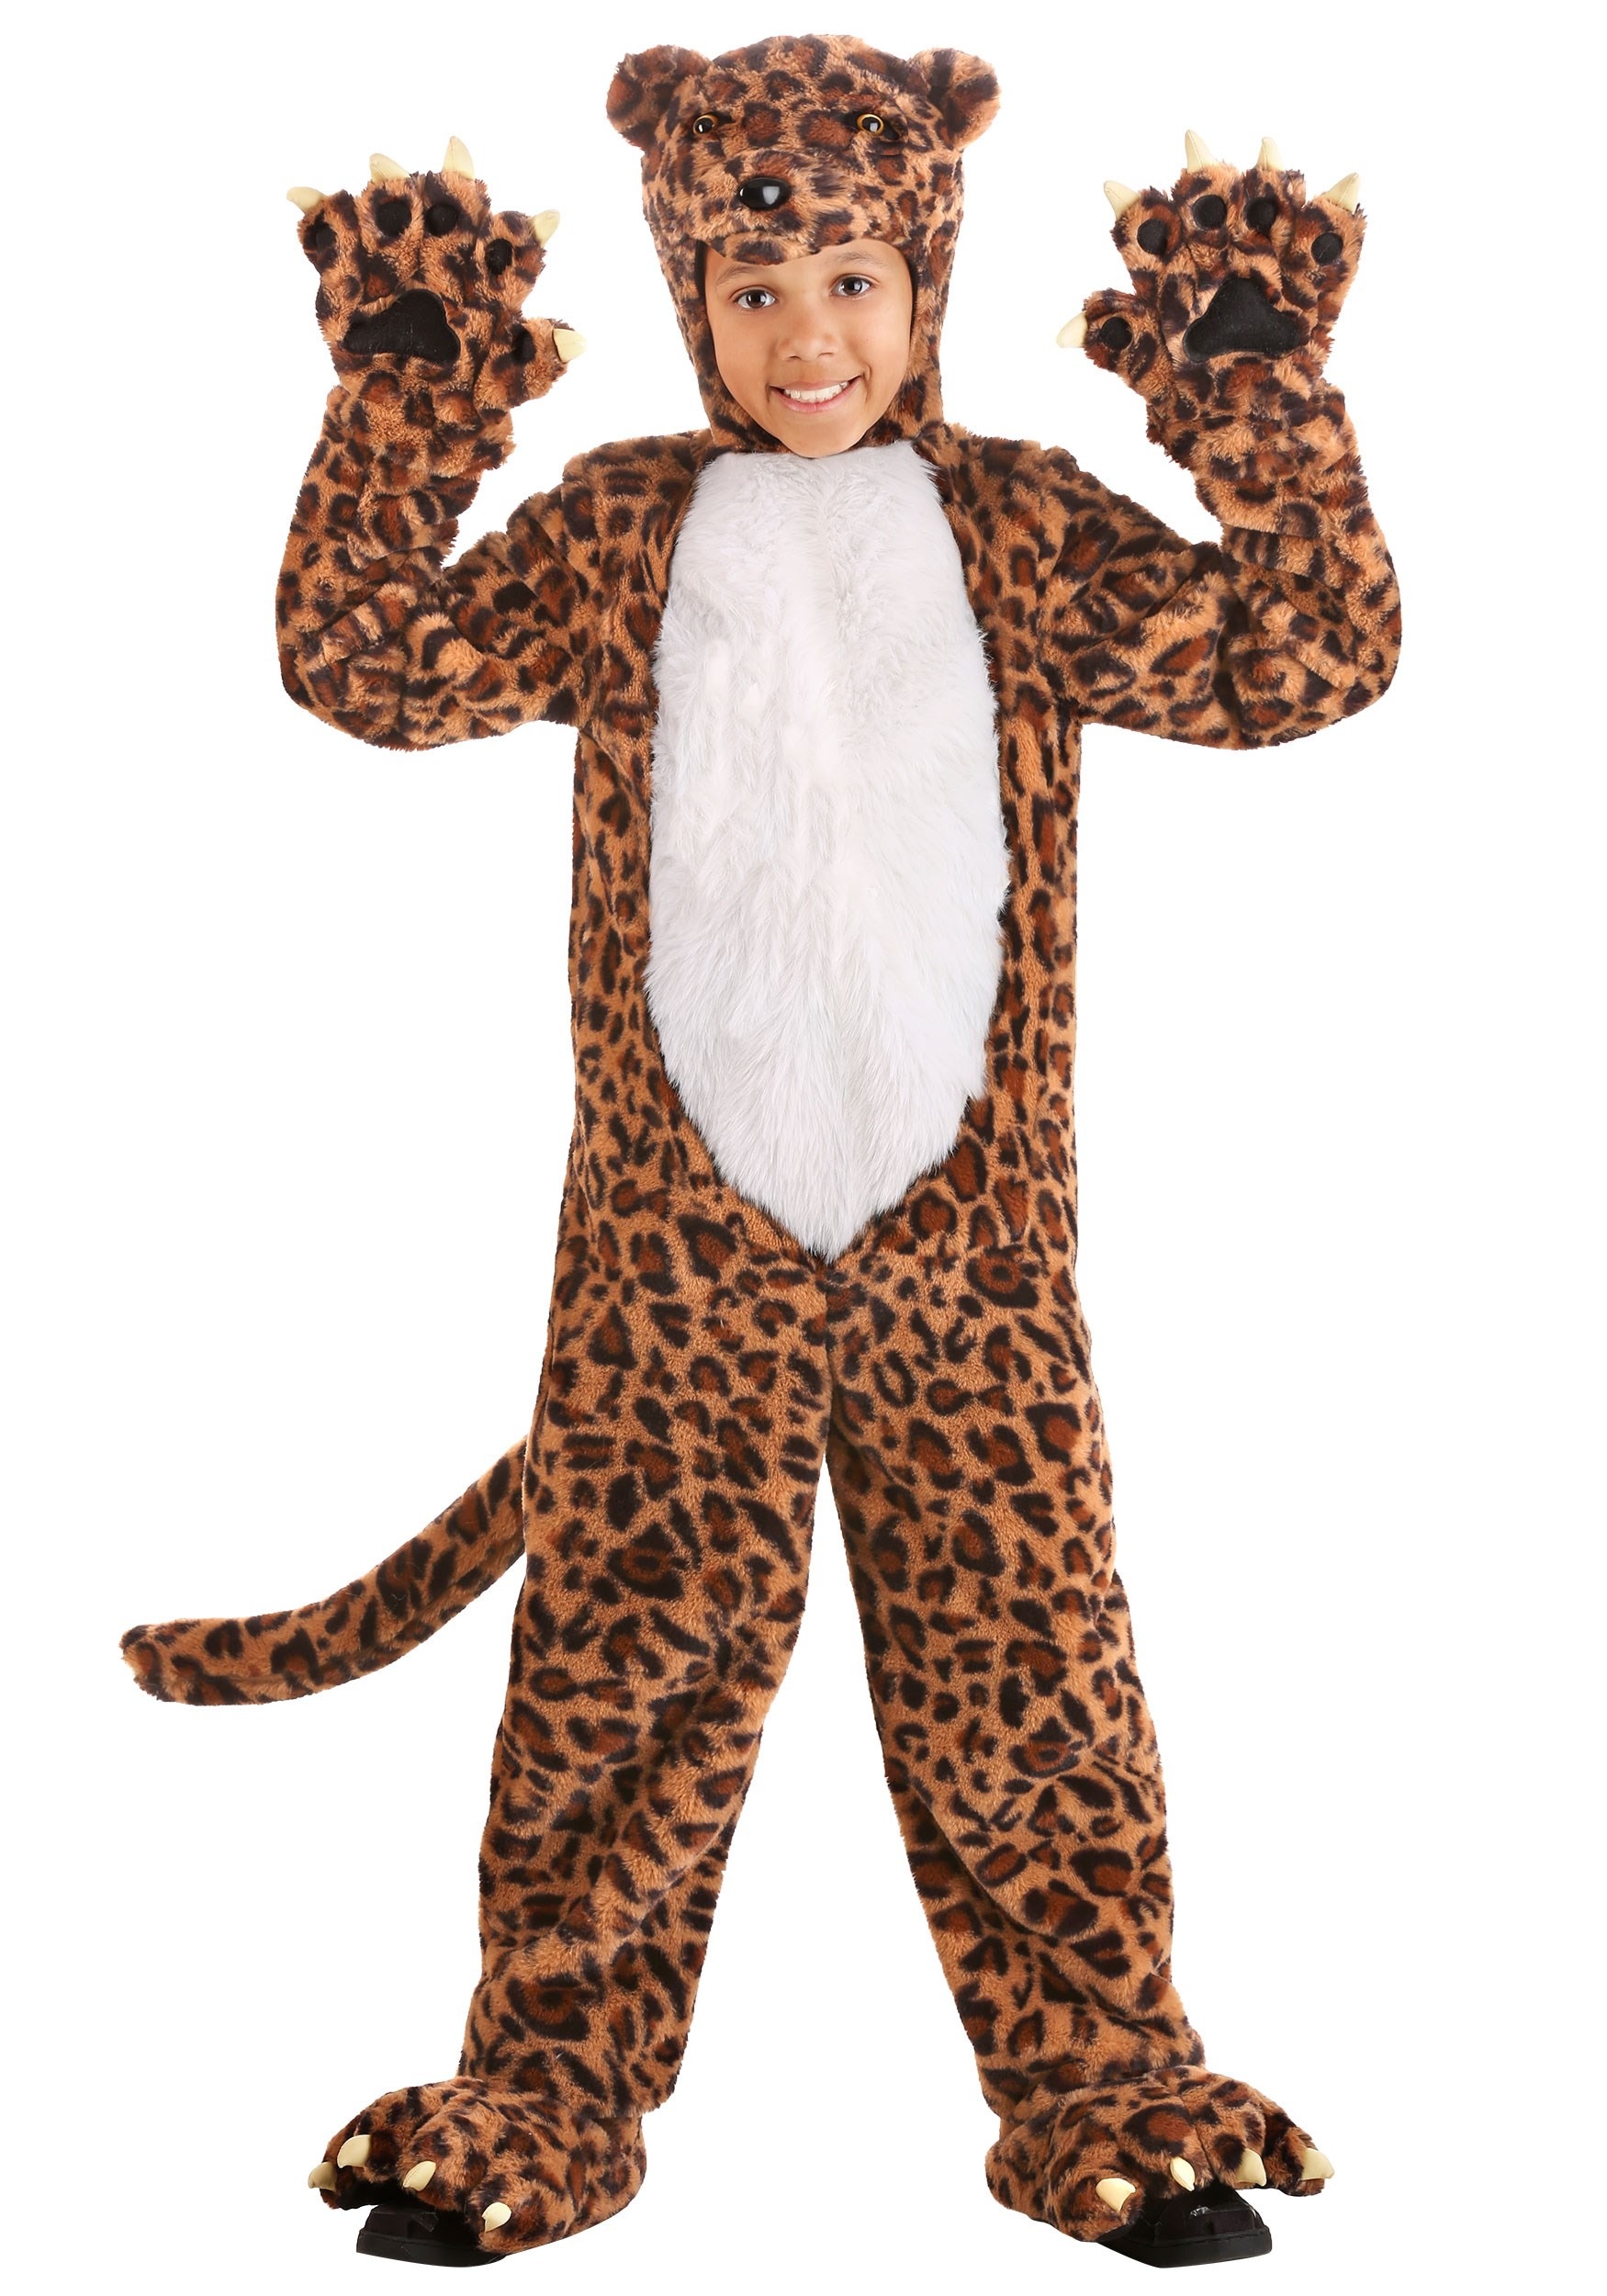 Photos - Fancy Dress Leopard FUN Costumes Leapin'  Costume for Kid's Black/Brown/White F 